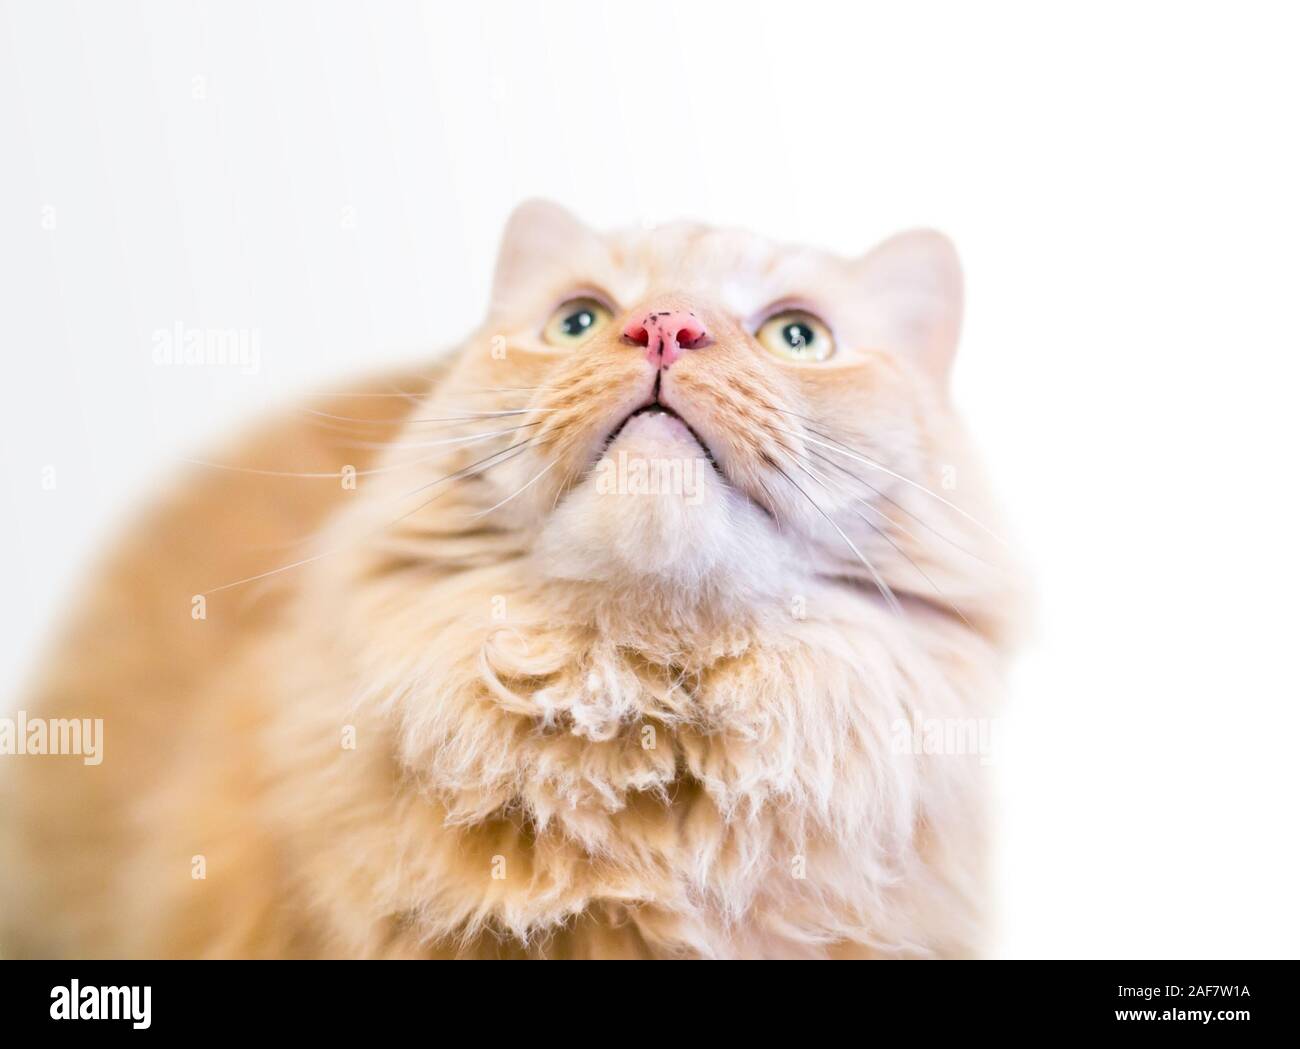 A Fluffy Orange Tabby Domestic Longhair Cat With Freckles On Its Nose Looking Up Stock Photo Alamy